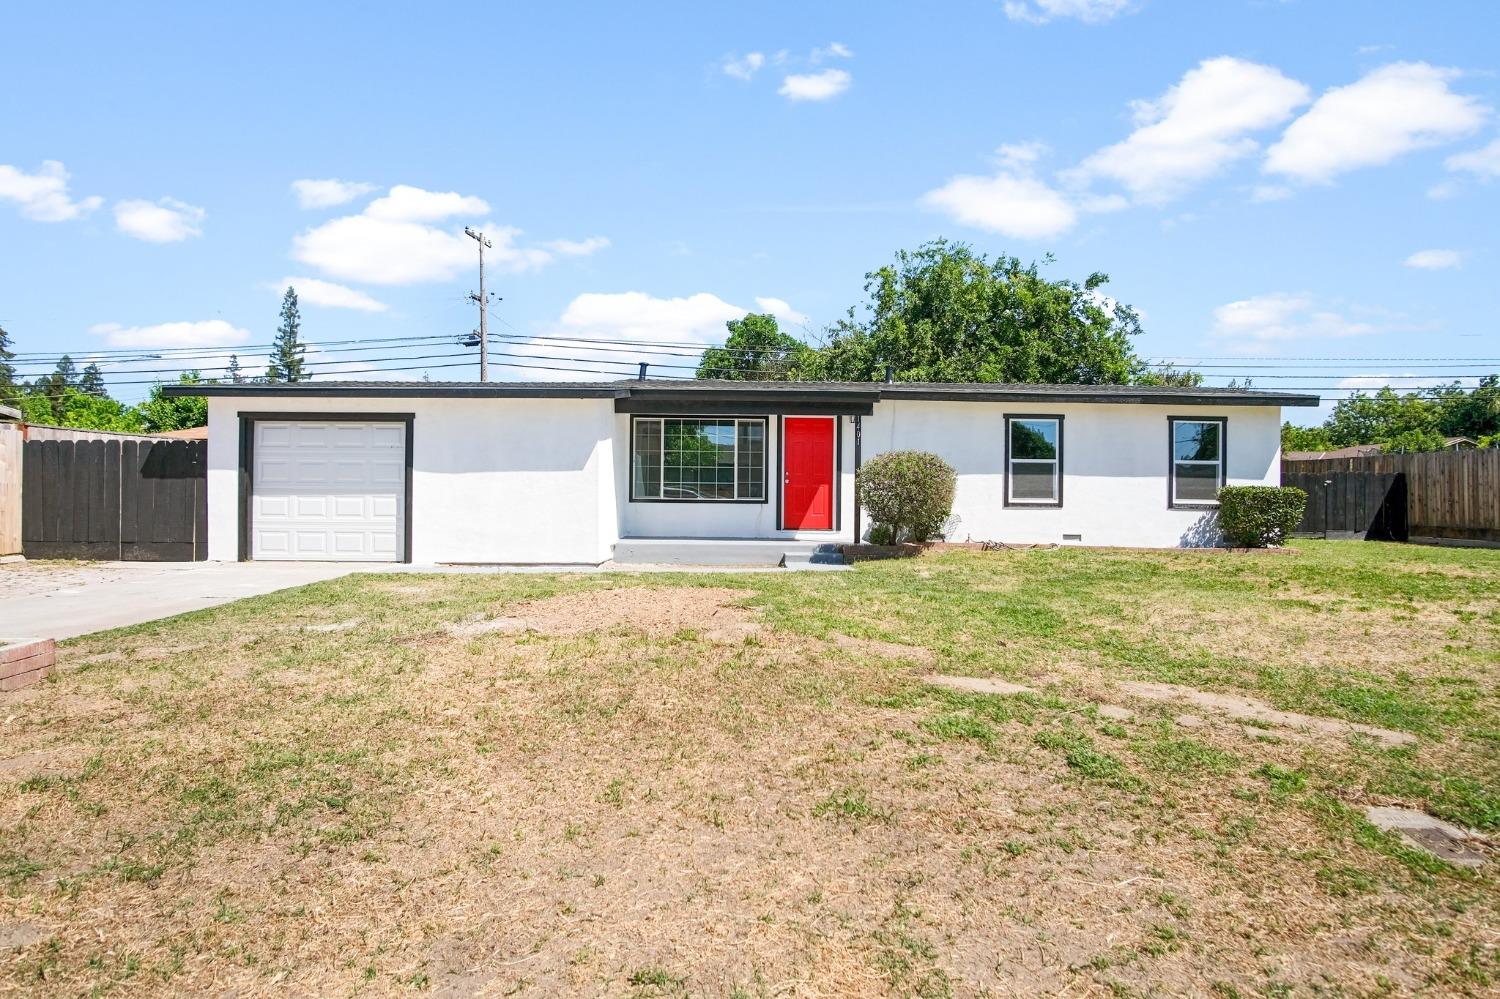 Photo of 1401 Laurie Ln in Modesto, CA